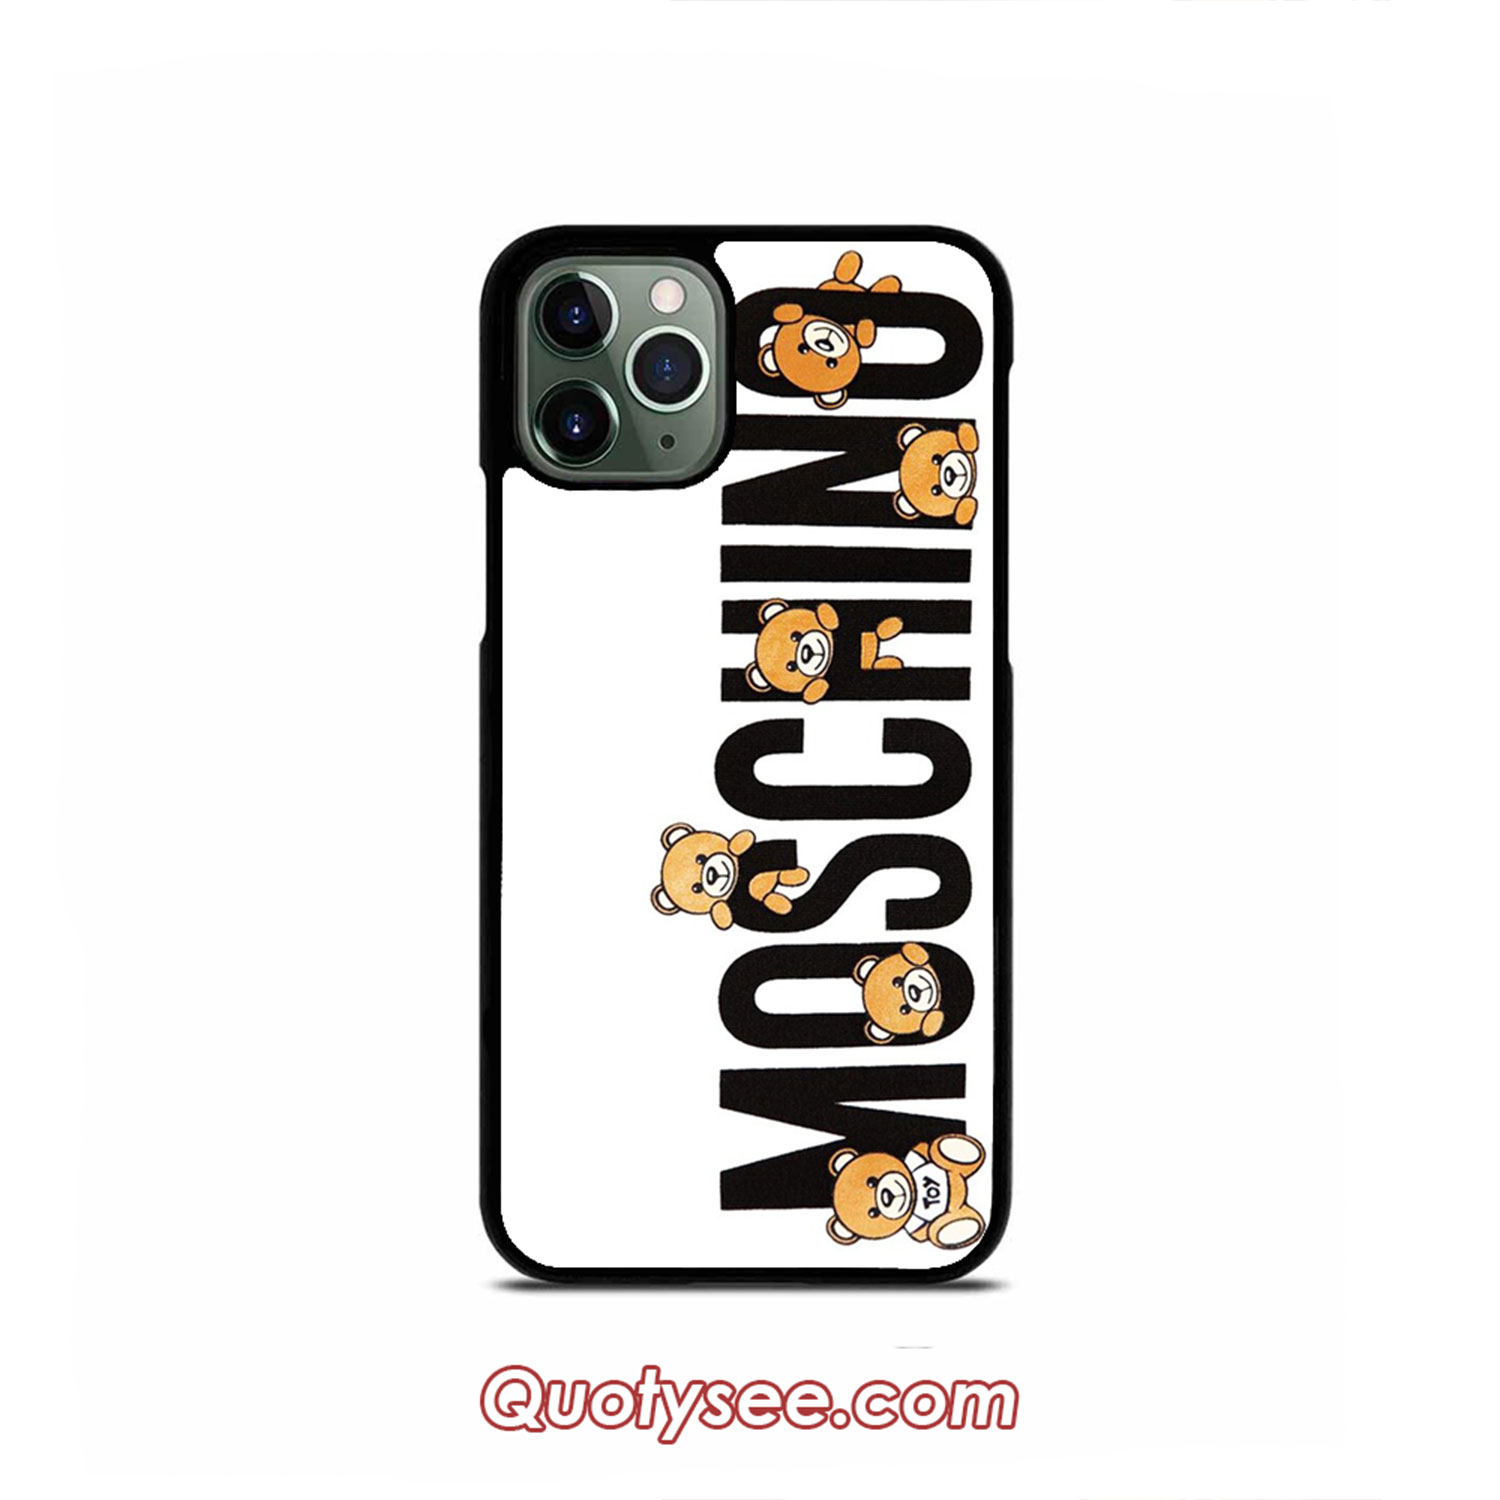 Cute Moschino Iphone Case 11 11 Pro 11 Pro Max Xs Max Xr X 8 8 Plus 7 7 Plus 6 6s Quotysee Com